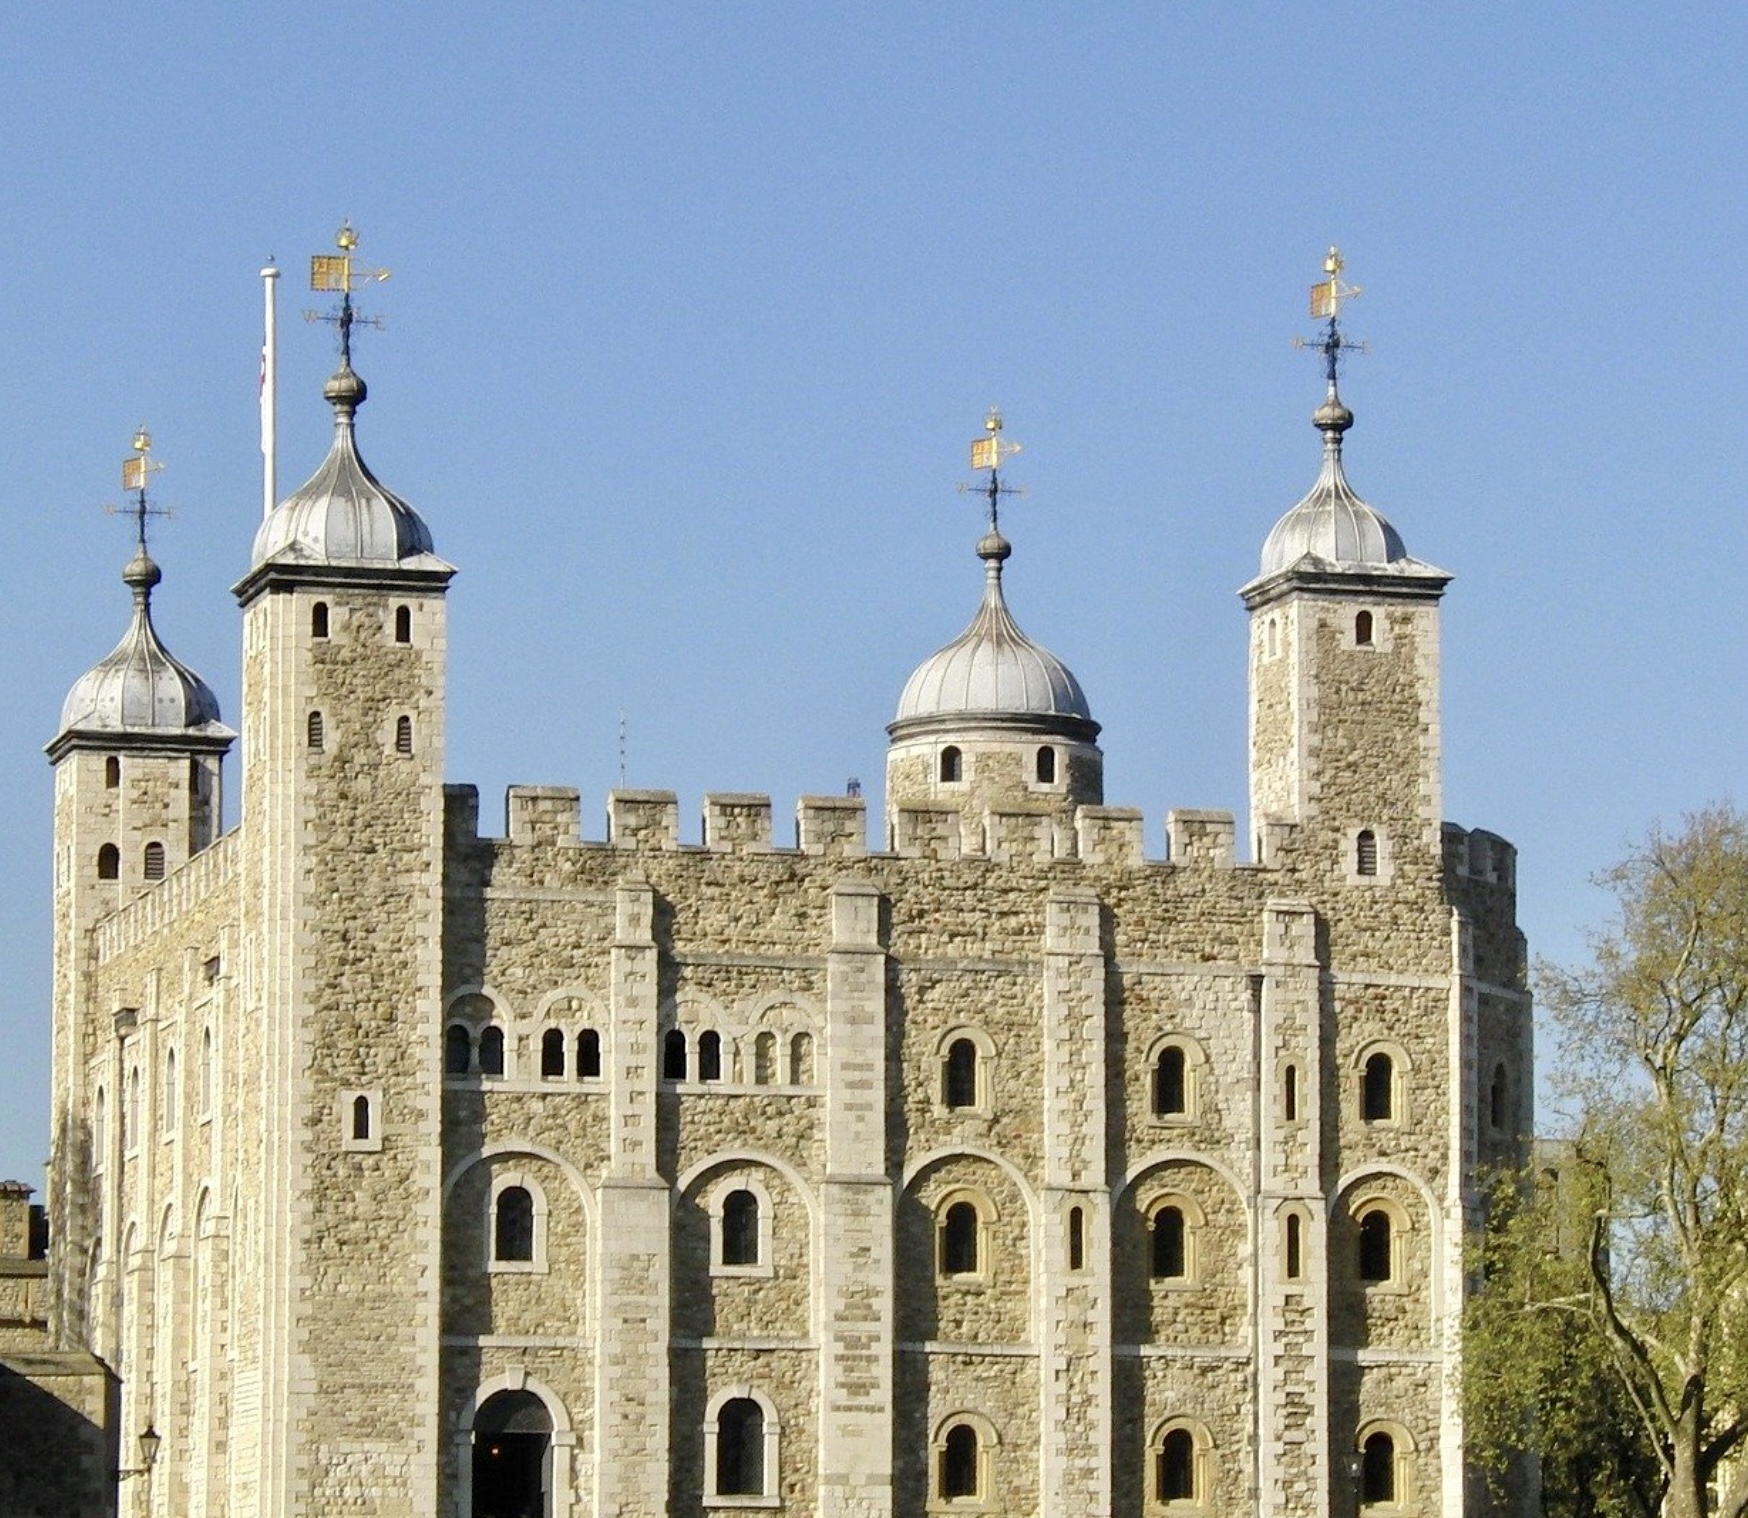 Tower of London by pixabay.com